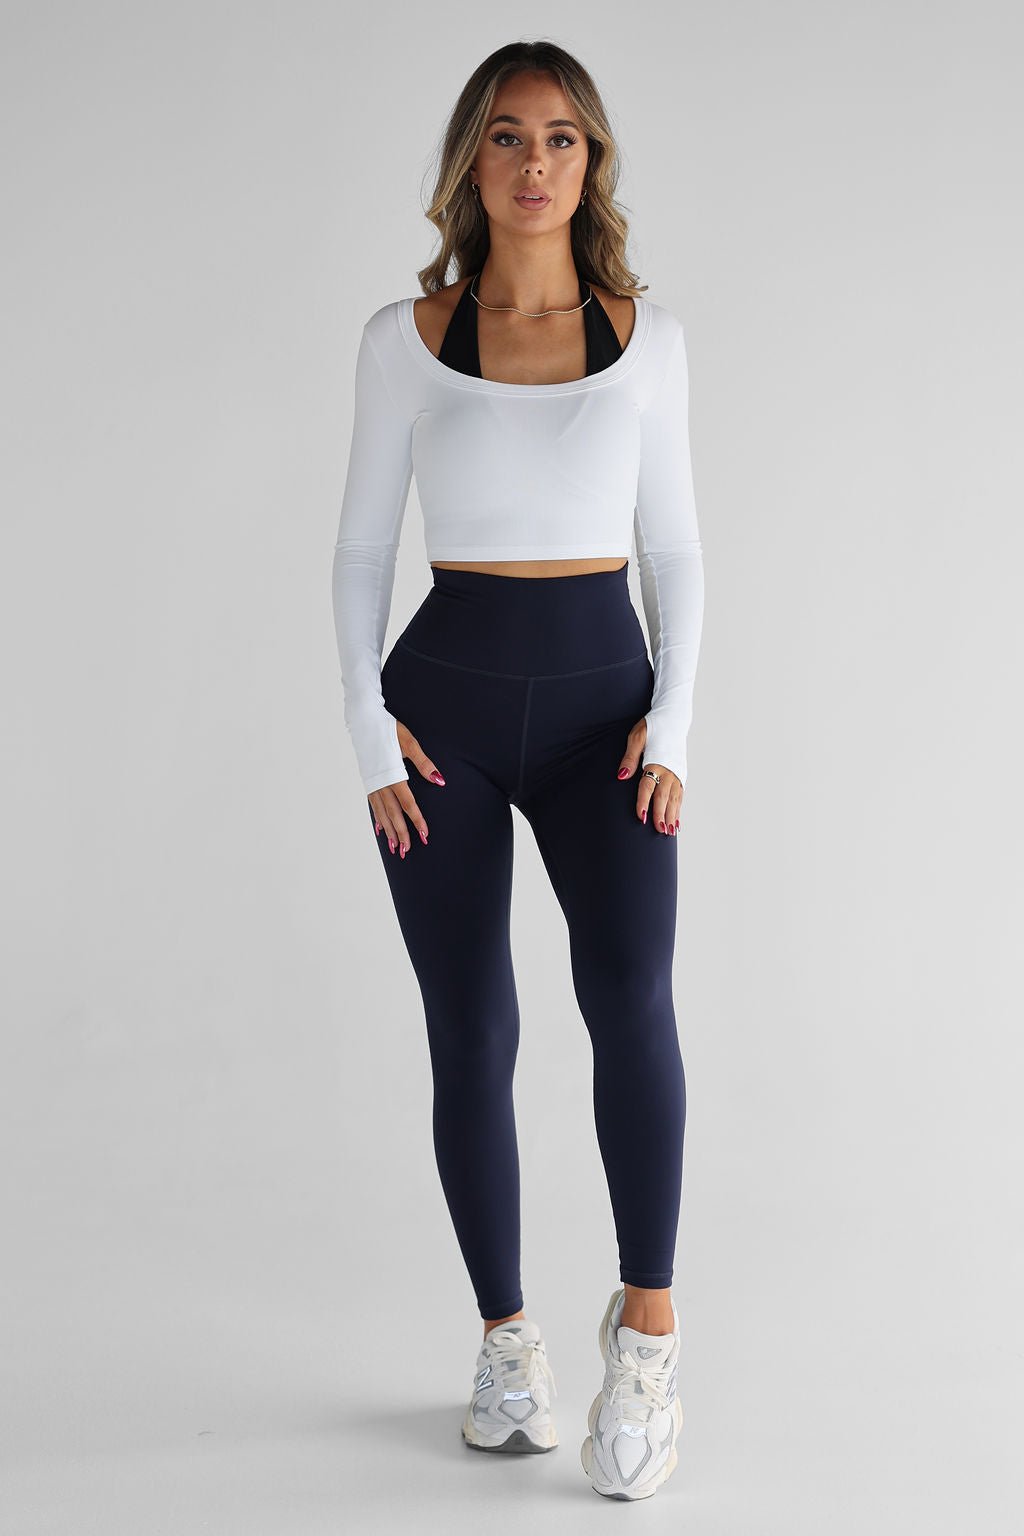 Midnight Blue Full Length Leggings, High Waisted and 5 Star Rated